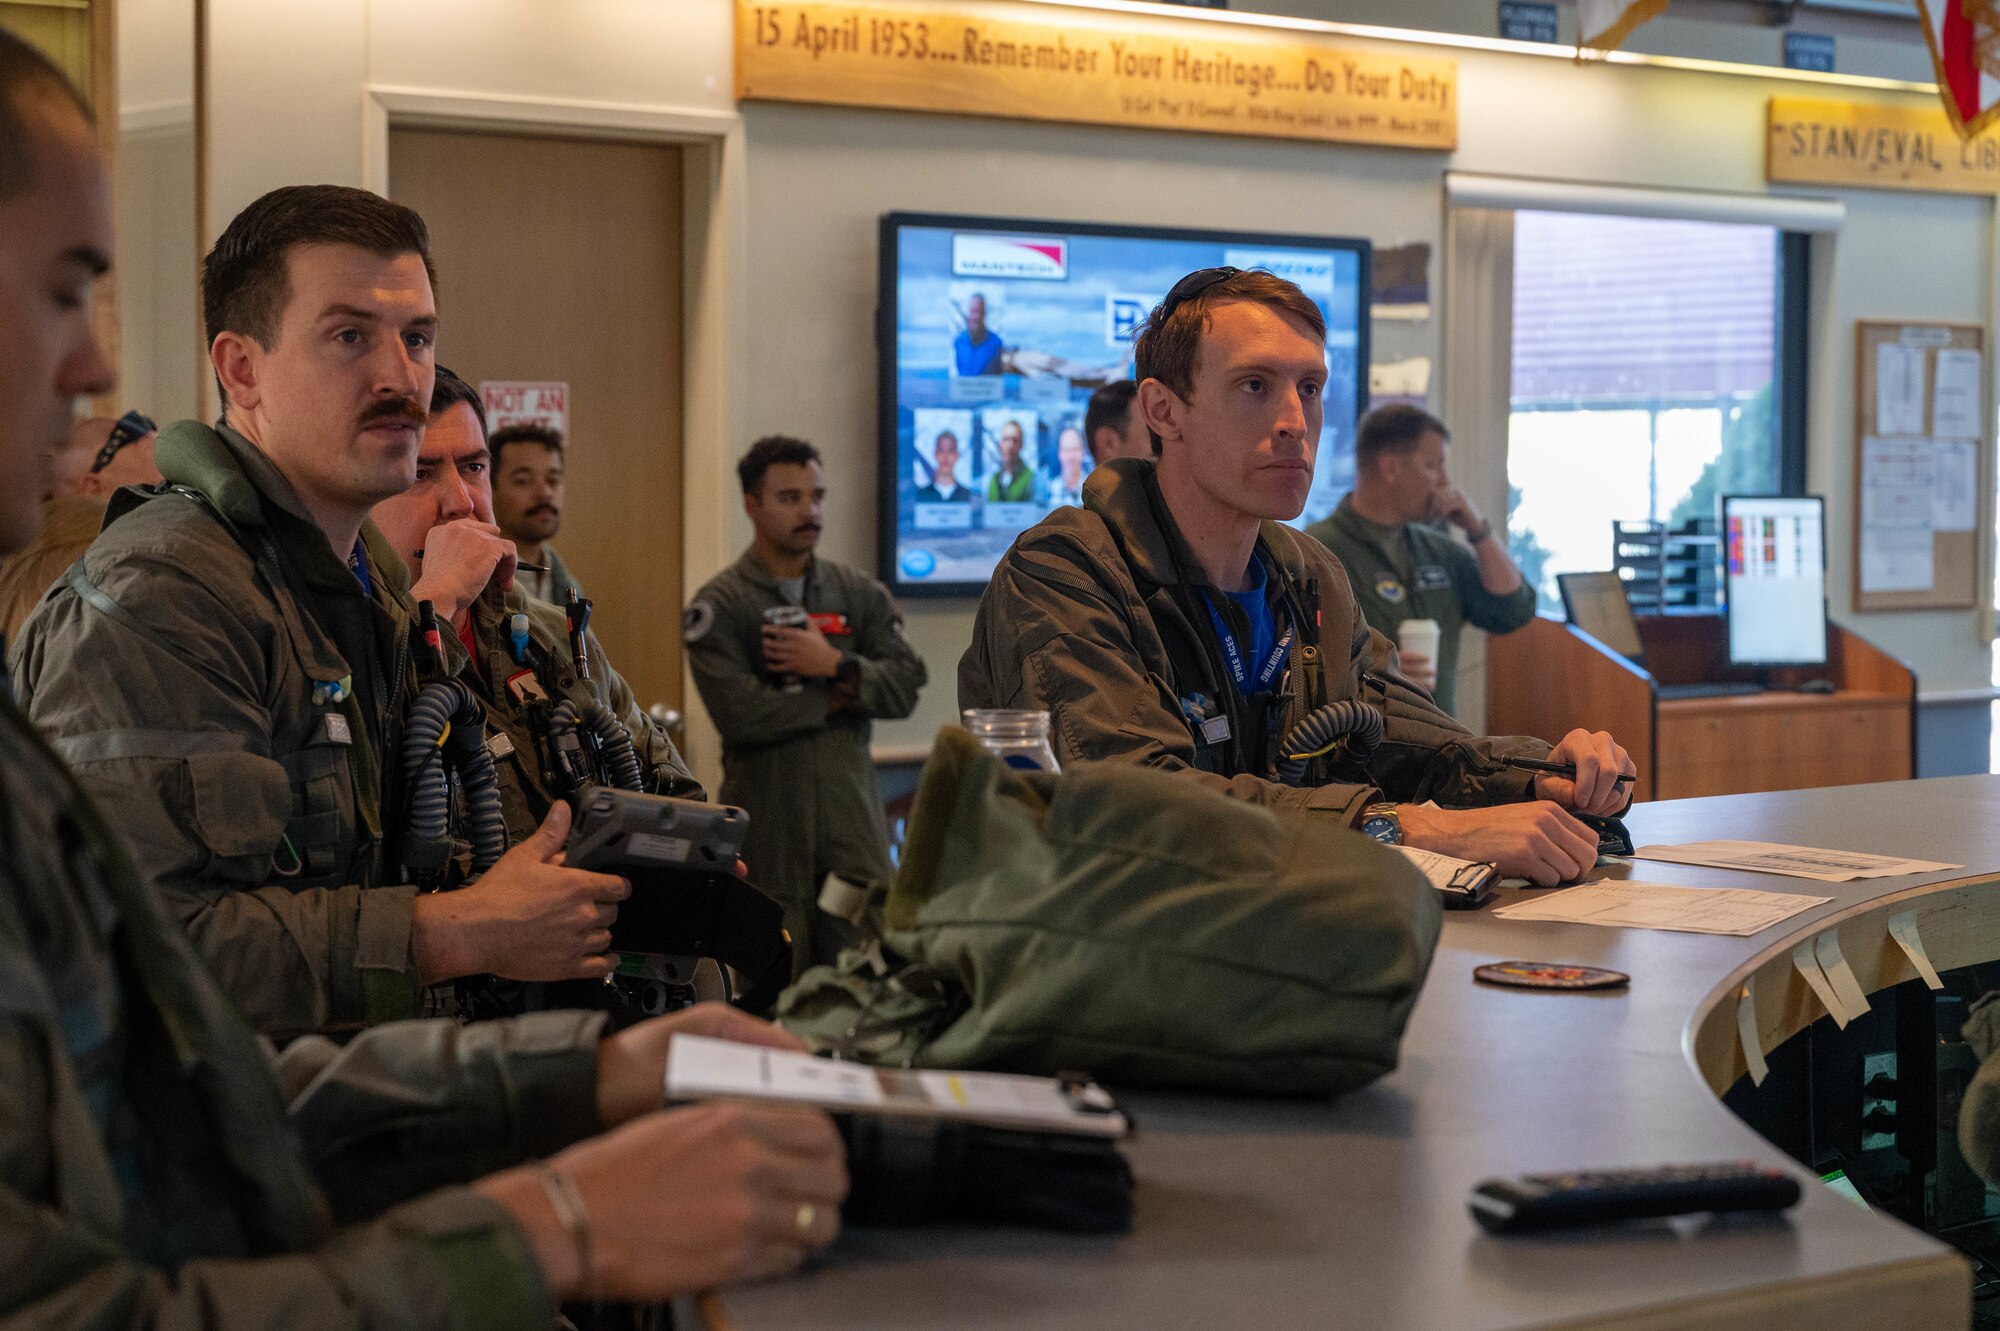 U.S. Air Force Airmen assigned to the 173rd Fighter Wing, Kingsley Field Air National Guard Base, Oregon, and the 56th Fighter Wing, Luke Air Force Base, Arizona, listen to a pre-flight weather brief May 15, 2023, at Kingsley Field ANGB, Oregon.